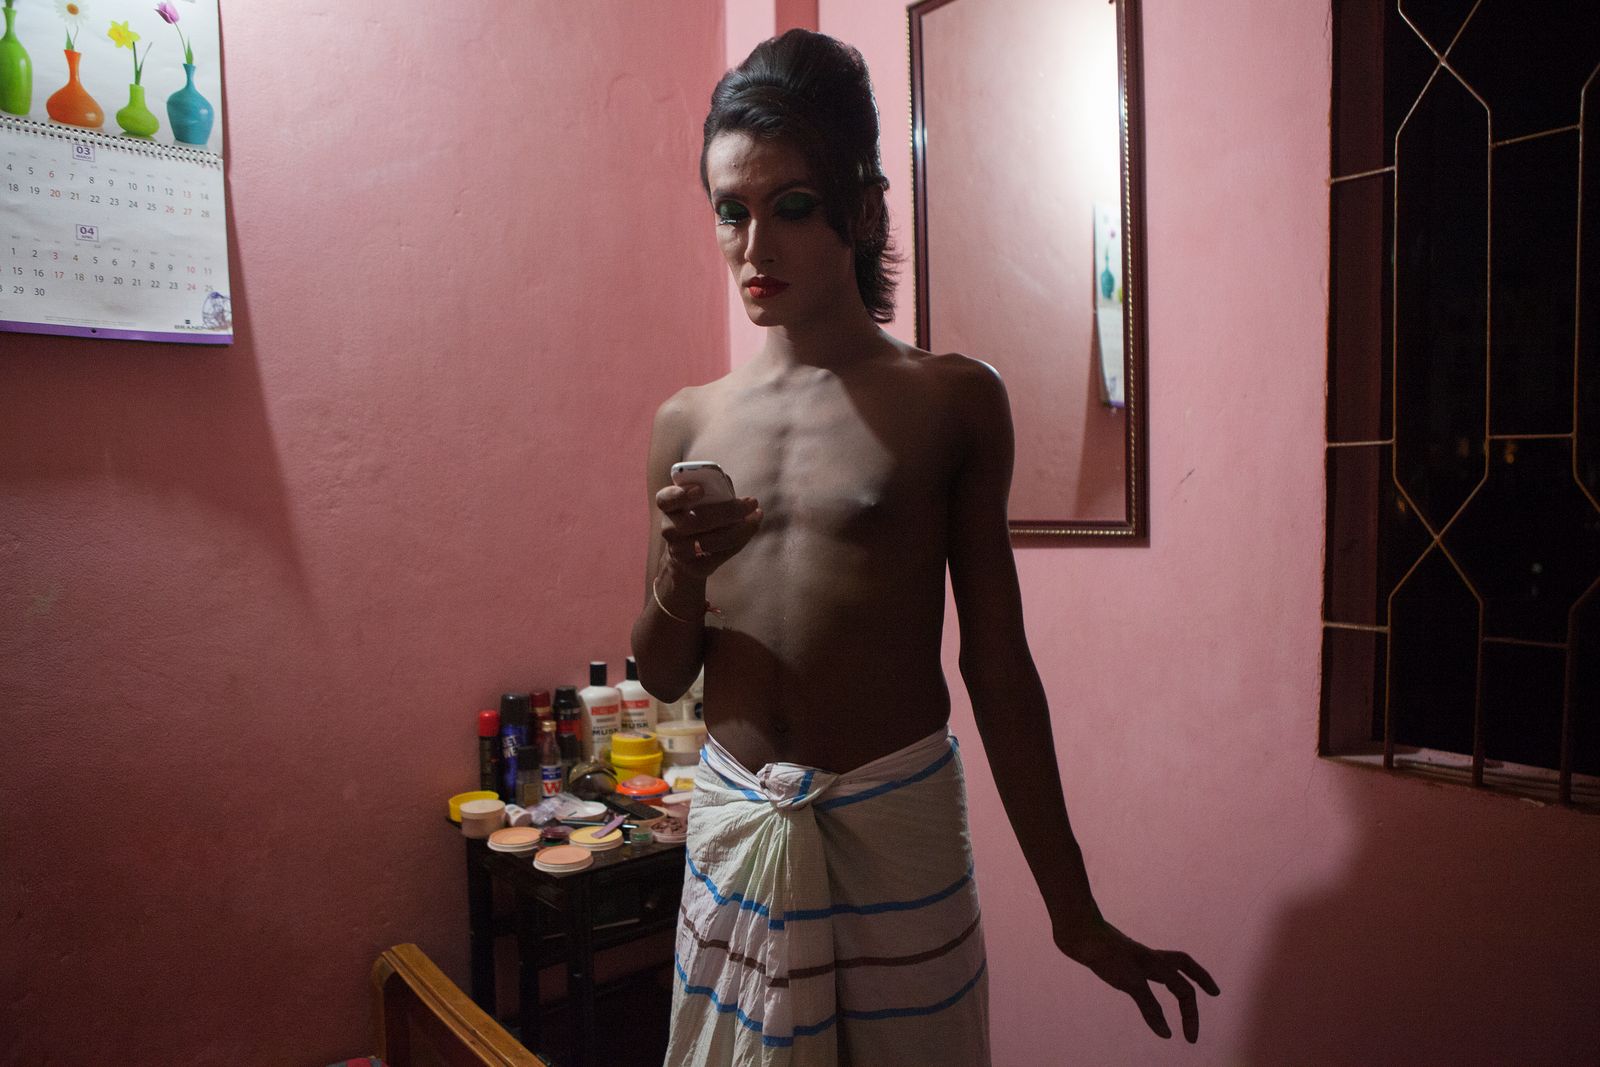 © Raffaele Petralla - Image from the HIDDEN QUEENS OF DHAKA photography project